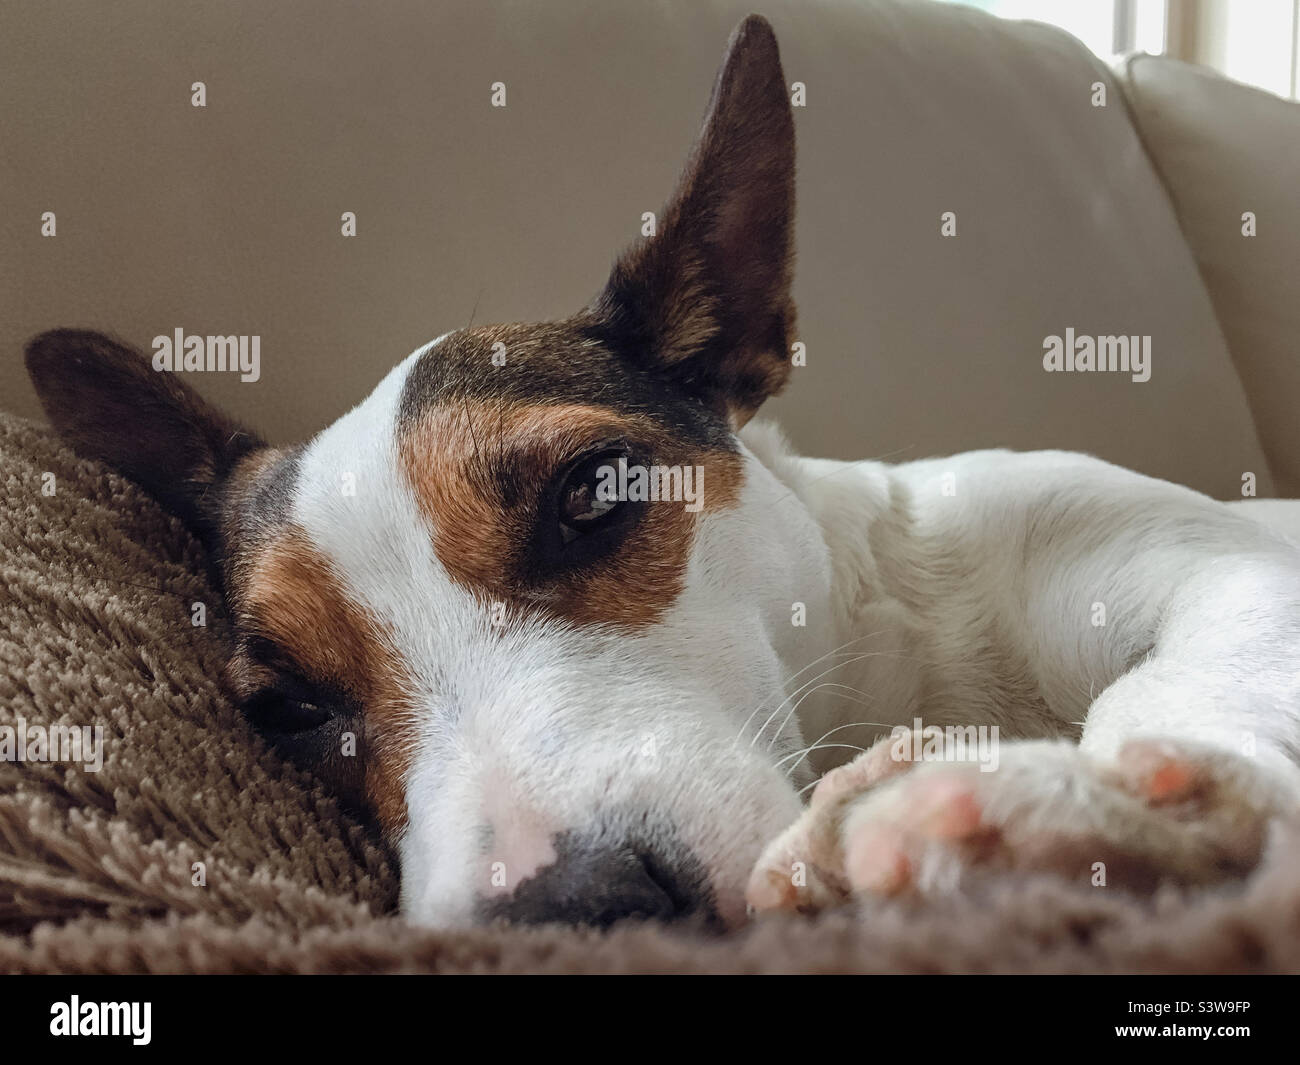 Low angle shot of a sleepy Jack Russell Terrier dog lying down on a brown fleece blanket on a living room sofa. Stock Photo